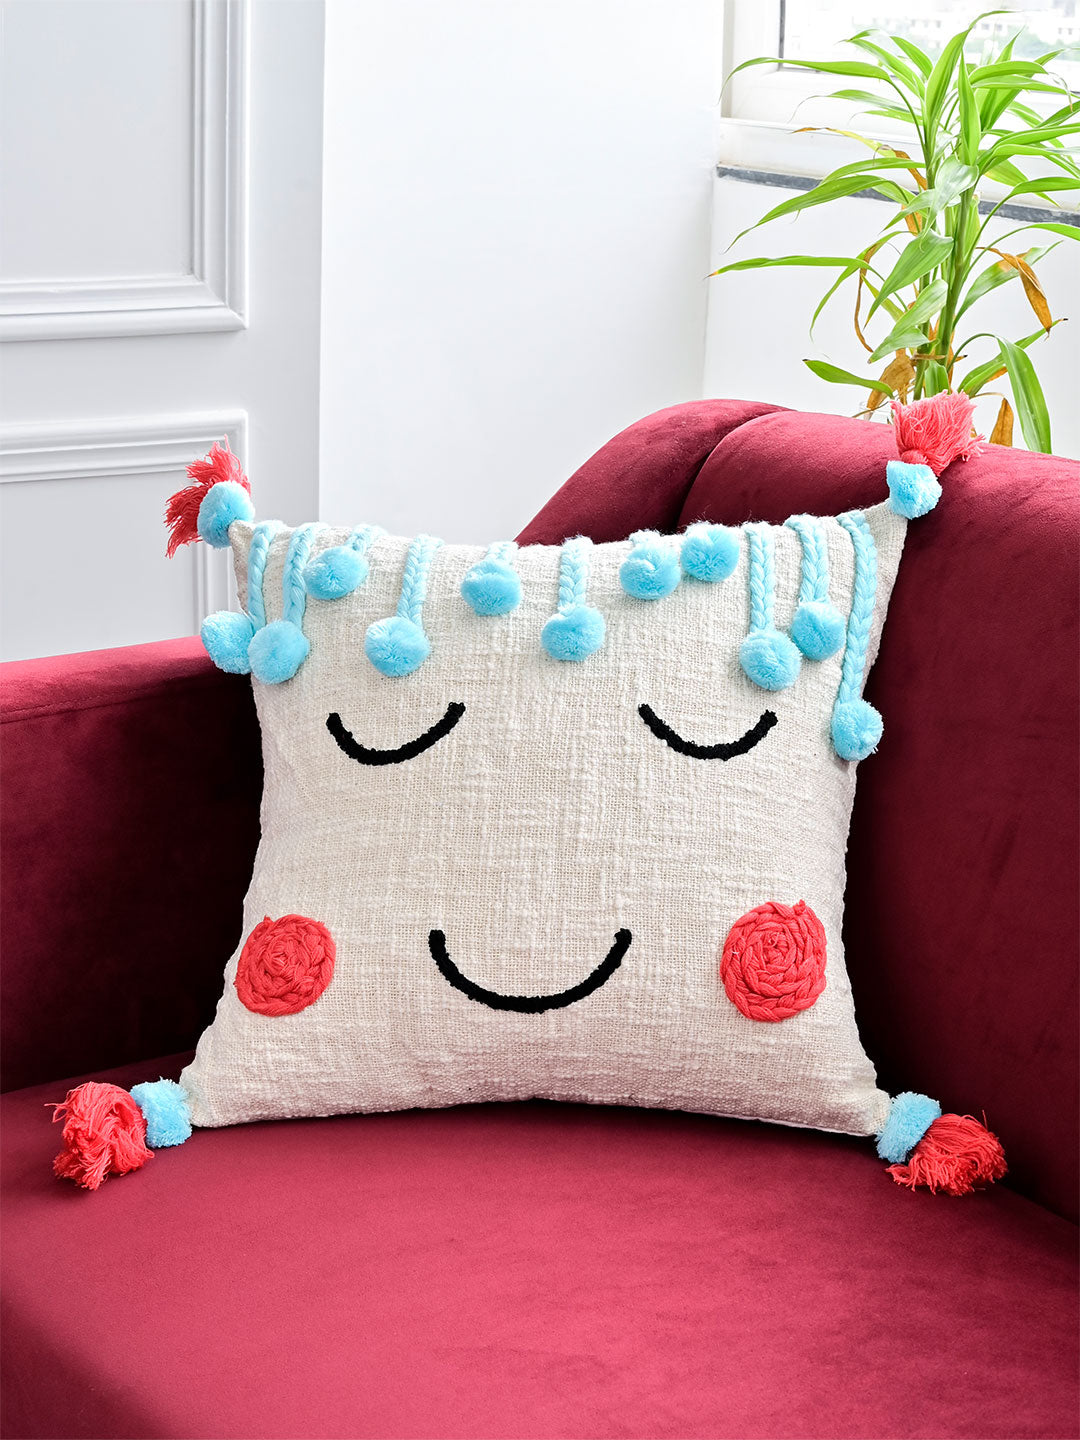 Blushy Smile Face Embroidered Cushion Cover